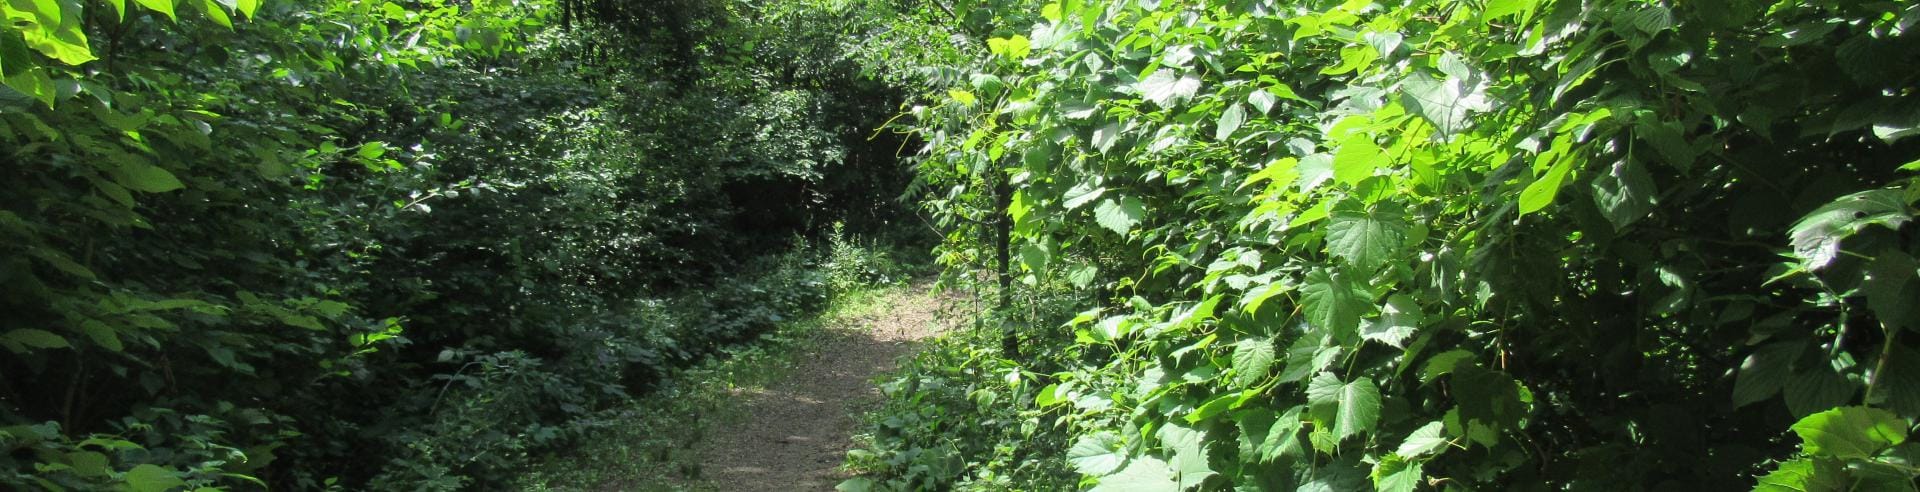 image of King Township trail